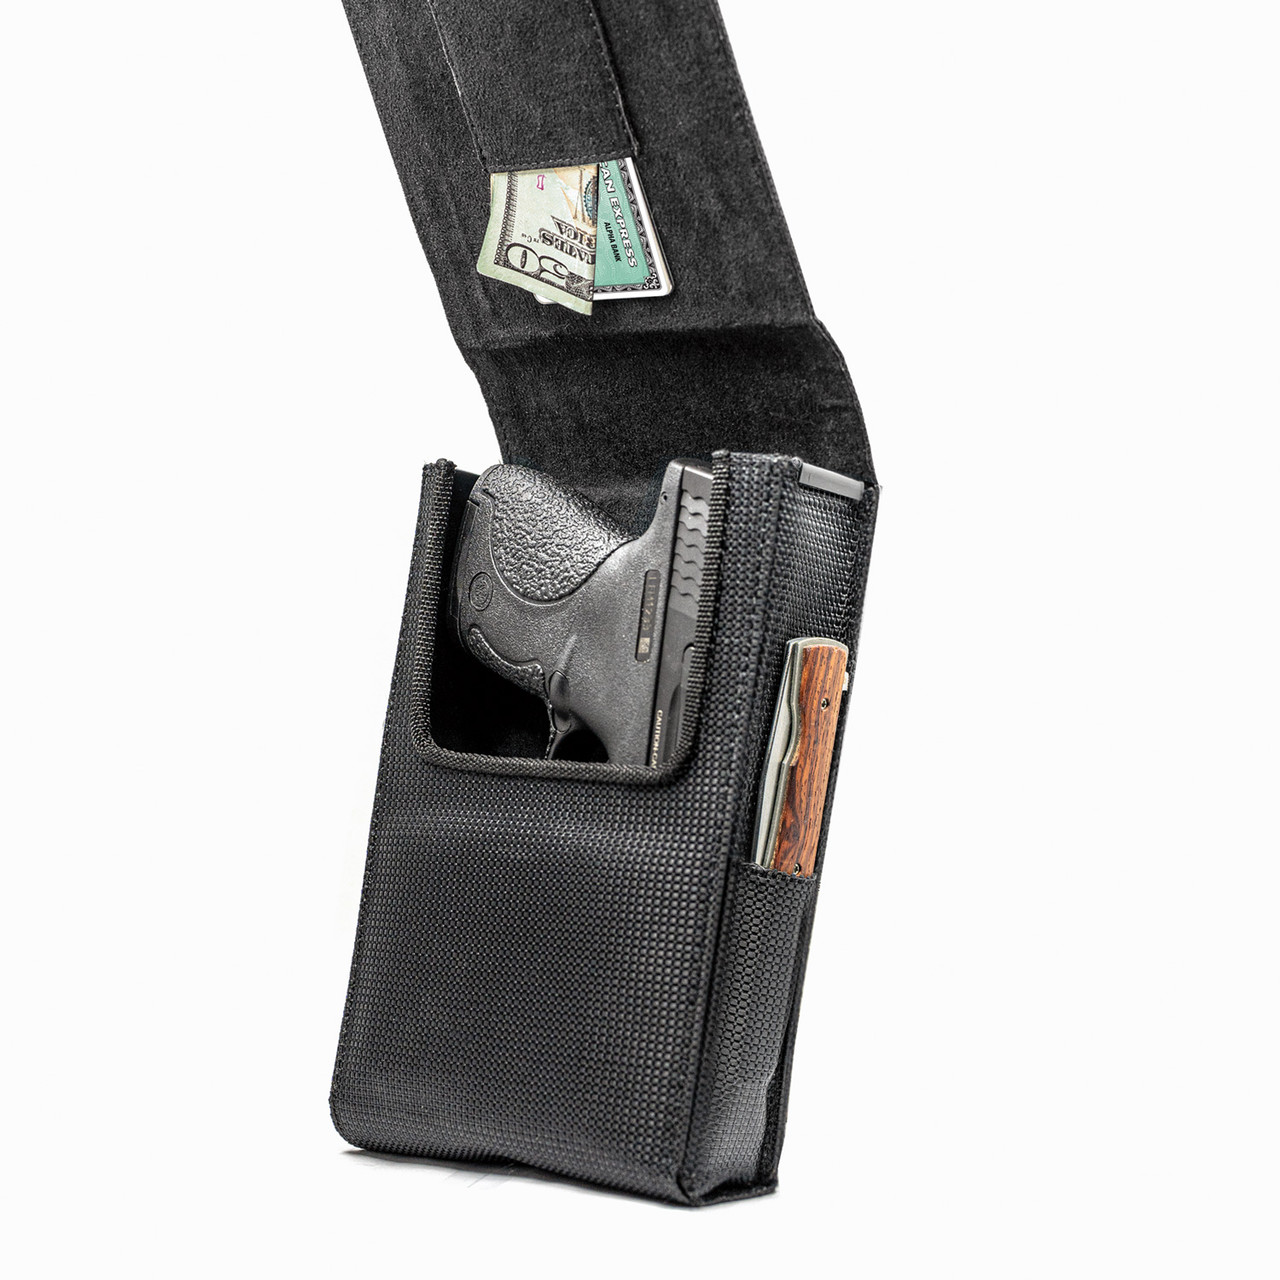 The Walther PPS 9mm Perfect Holster